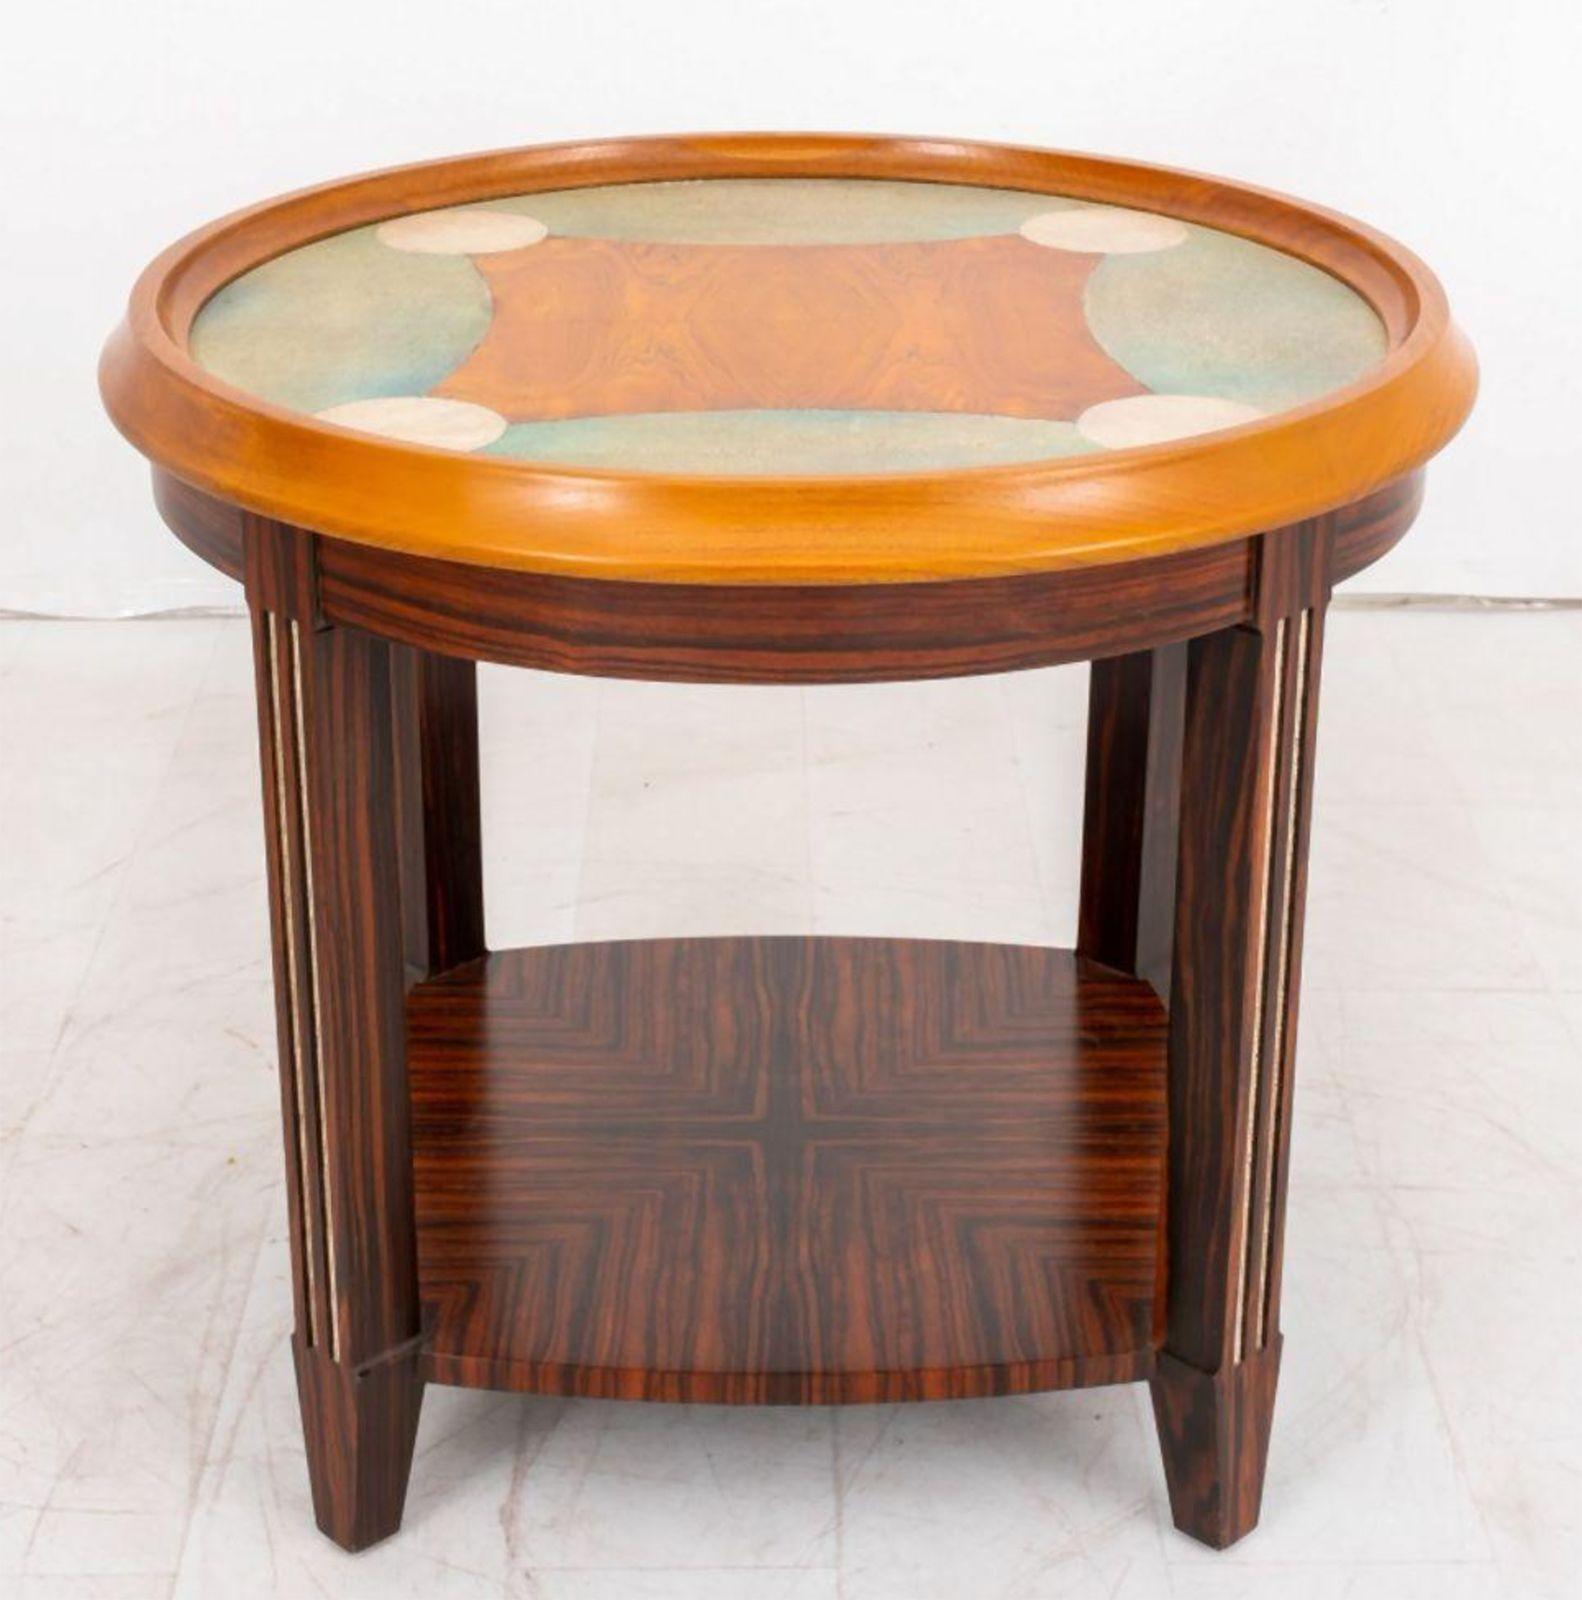 Vintage Art Deco side table made in a sophisticated design with Macassar ebony wood base, providing a rich, dark contrast. The tabletop is made with faux shagreen, and also boasts inlaid rosewood details. The piece also can be used as a game